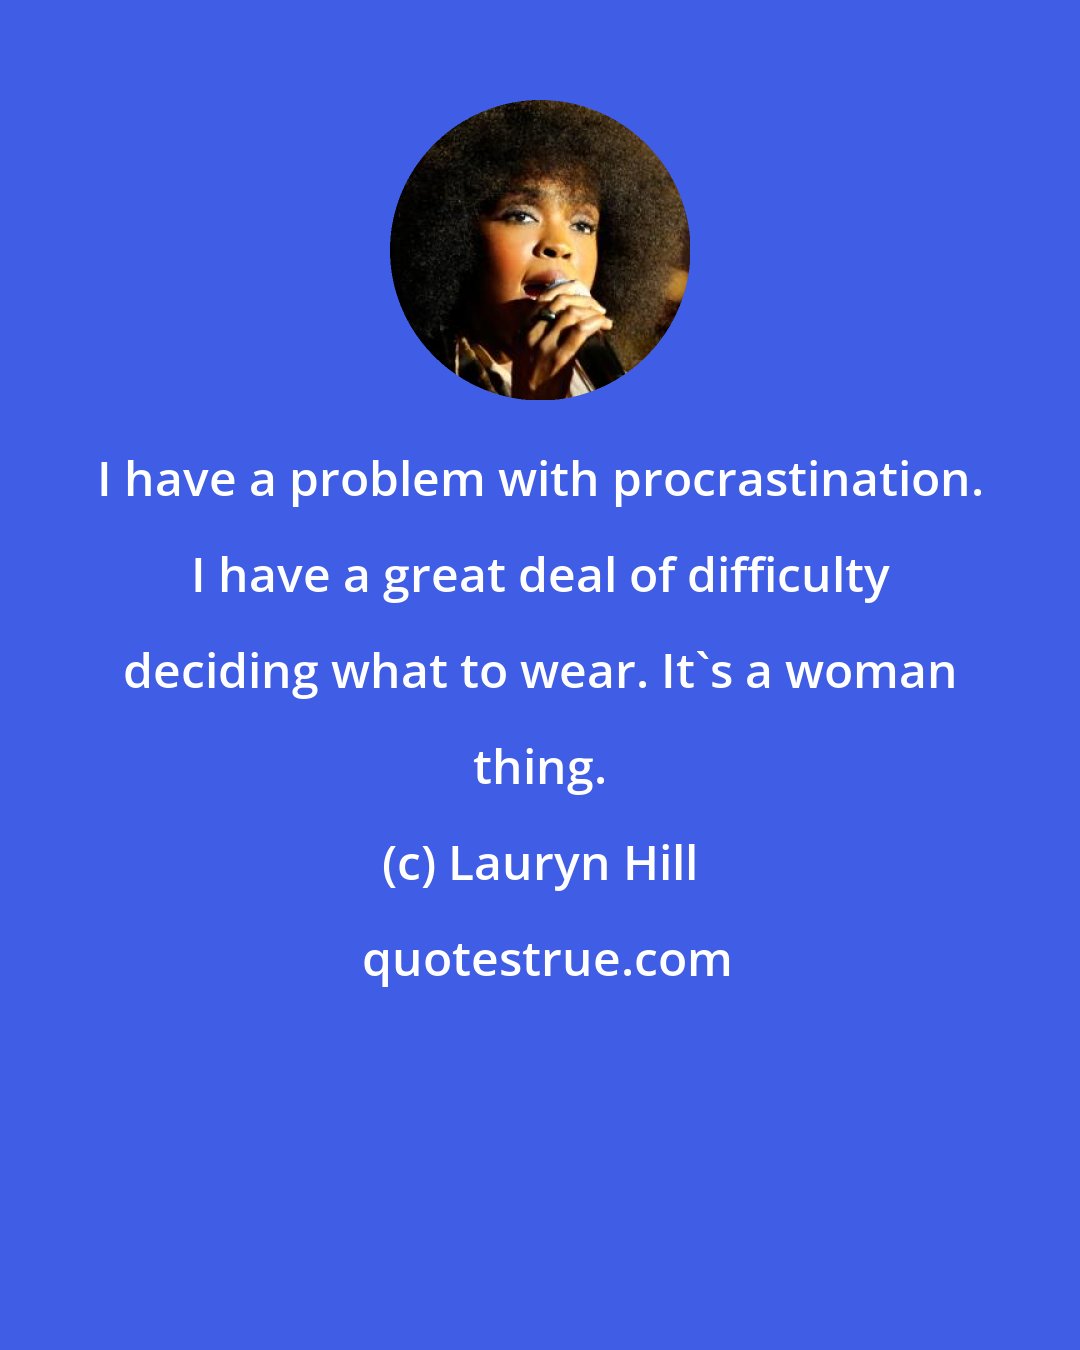 Lauryn Hill: I have a problem with procrastination. I have a great deal of difficulty deciding what to wear. It's a woman thing.